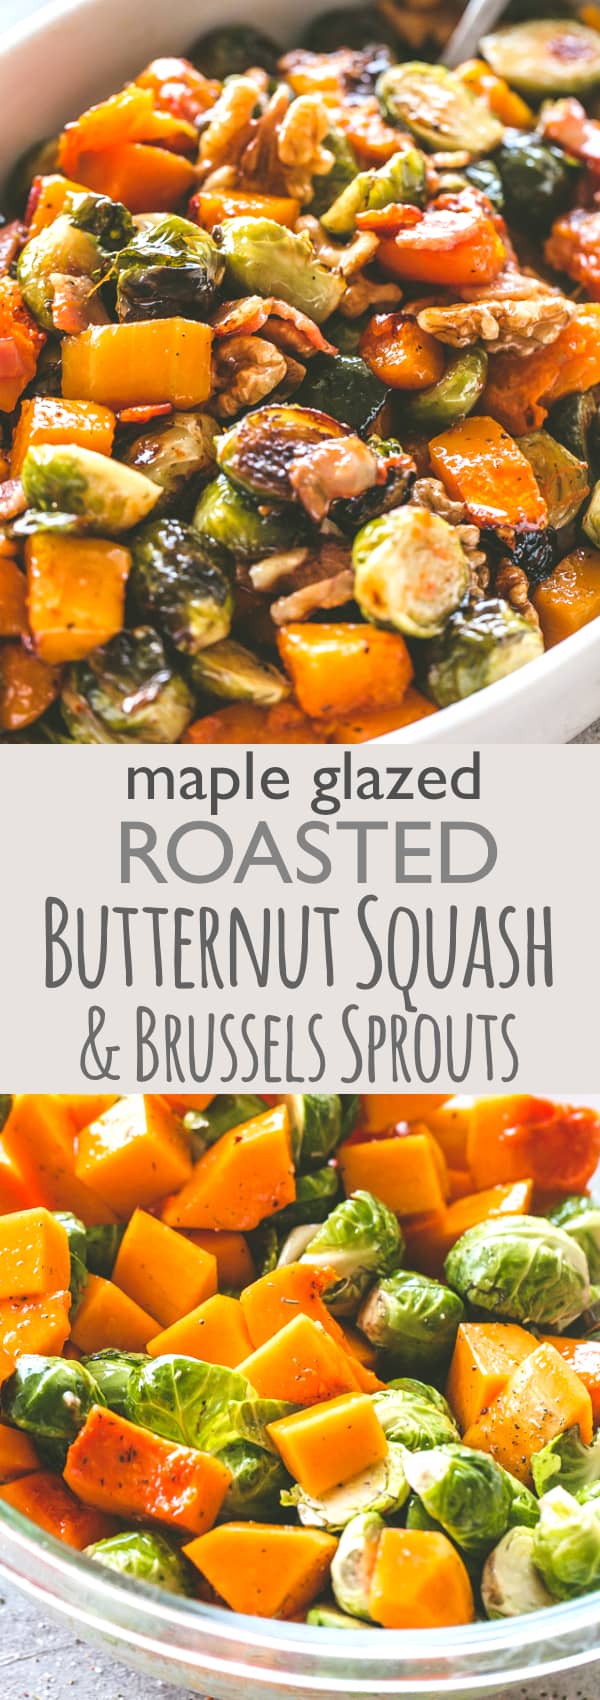 Delicious Maple Glazed Roasted Butternut Squash with Brussels Sprouts